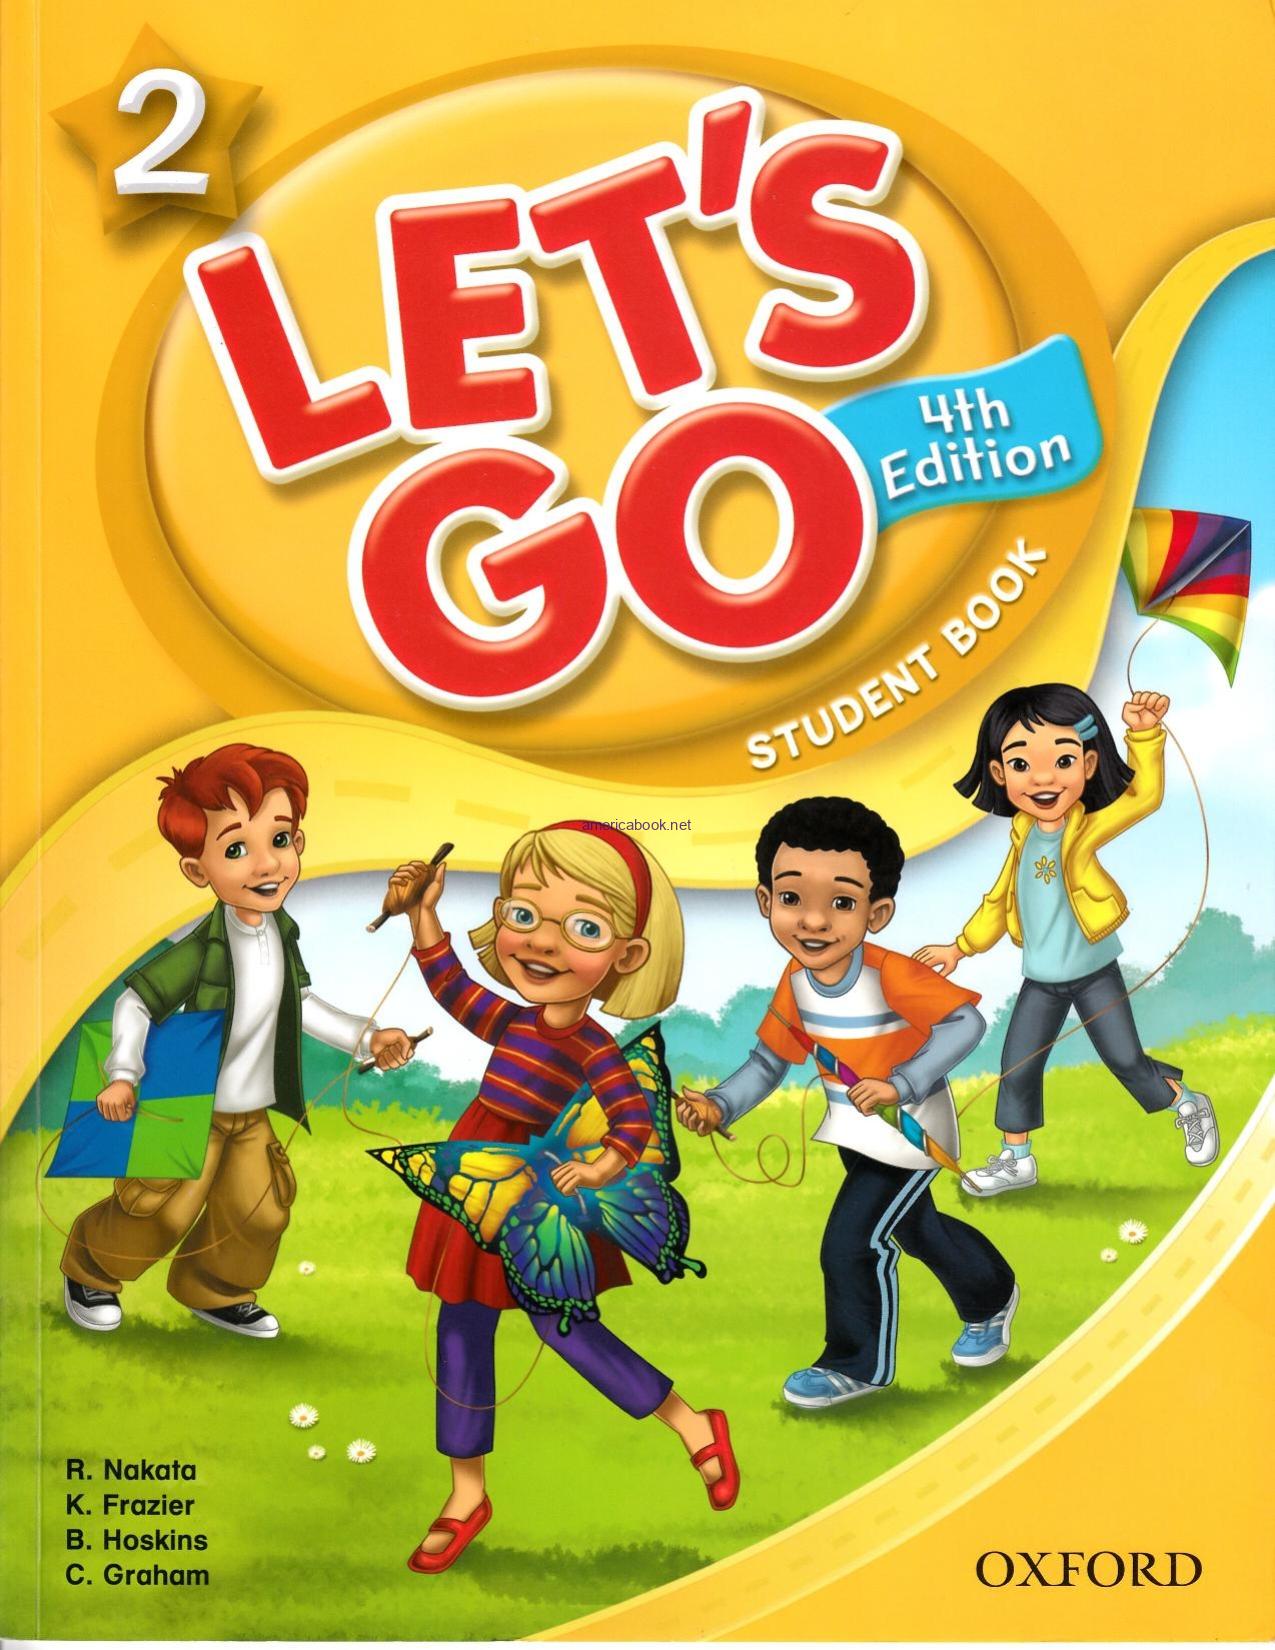 Let's Go 2 Student Book 4th Edition